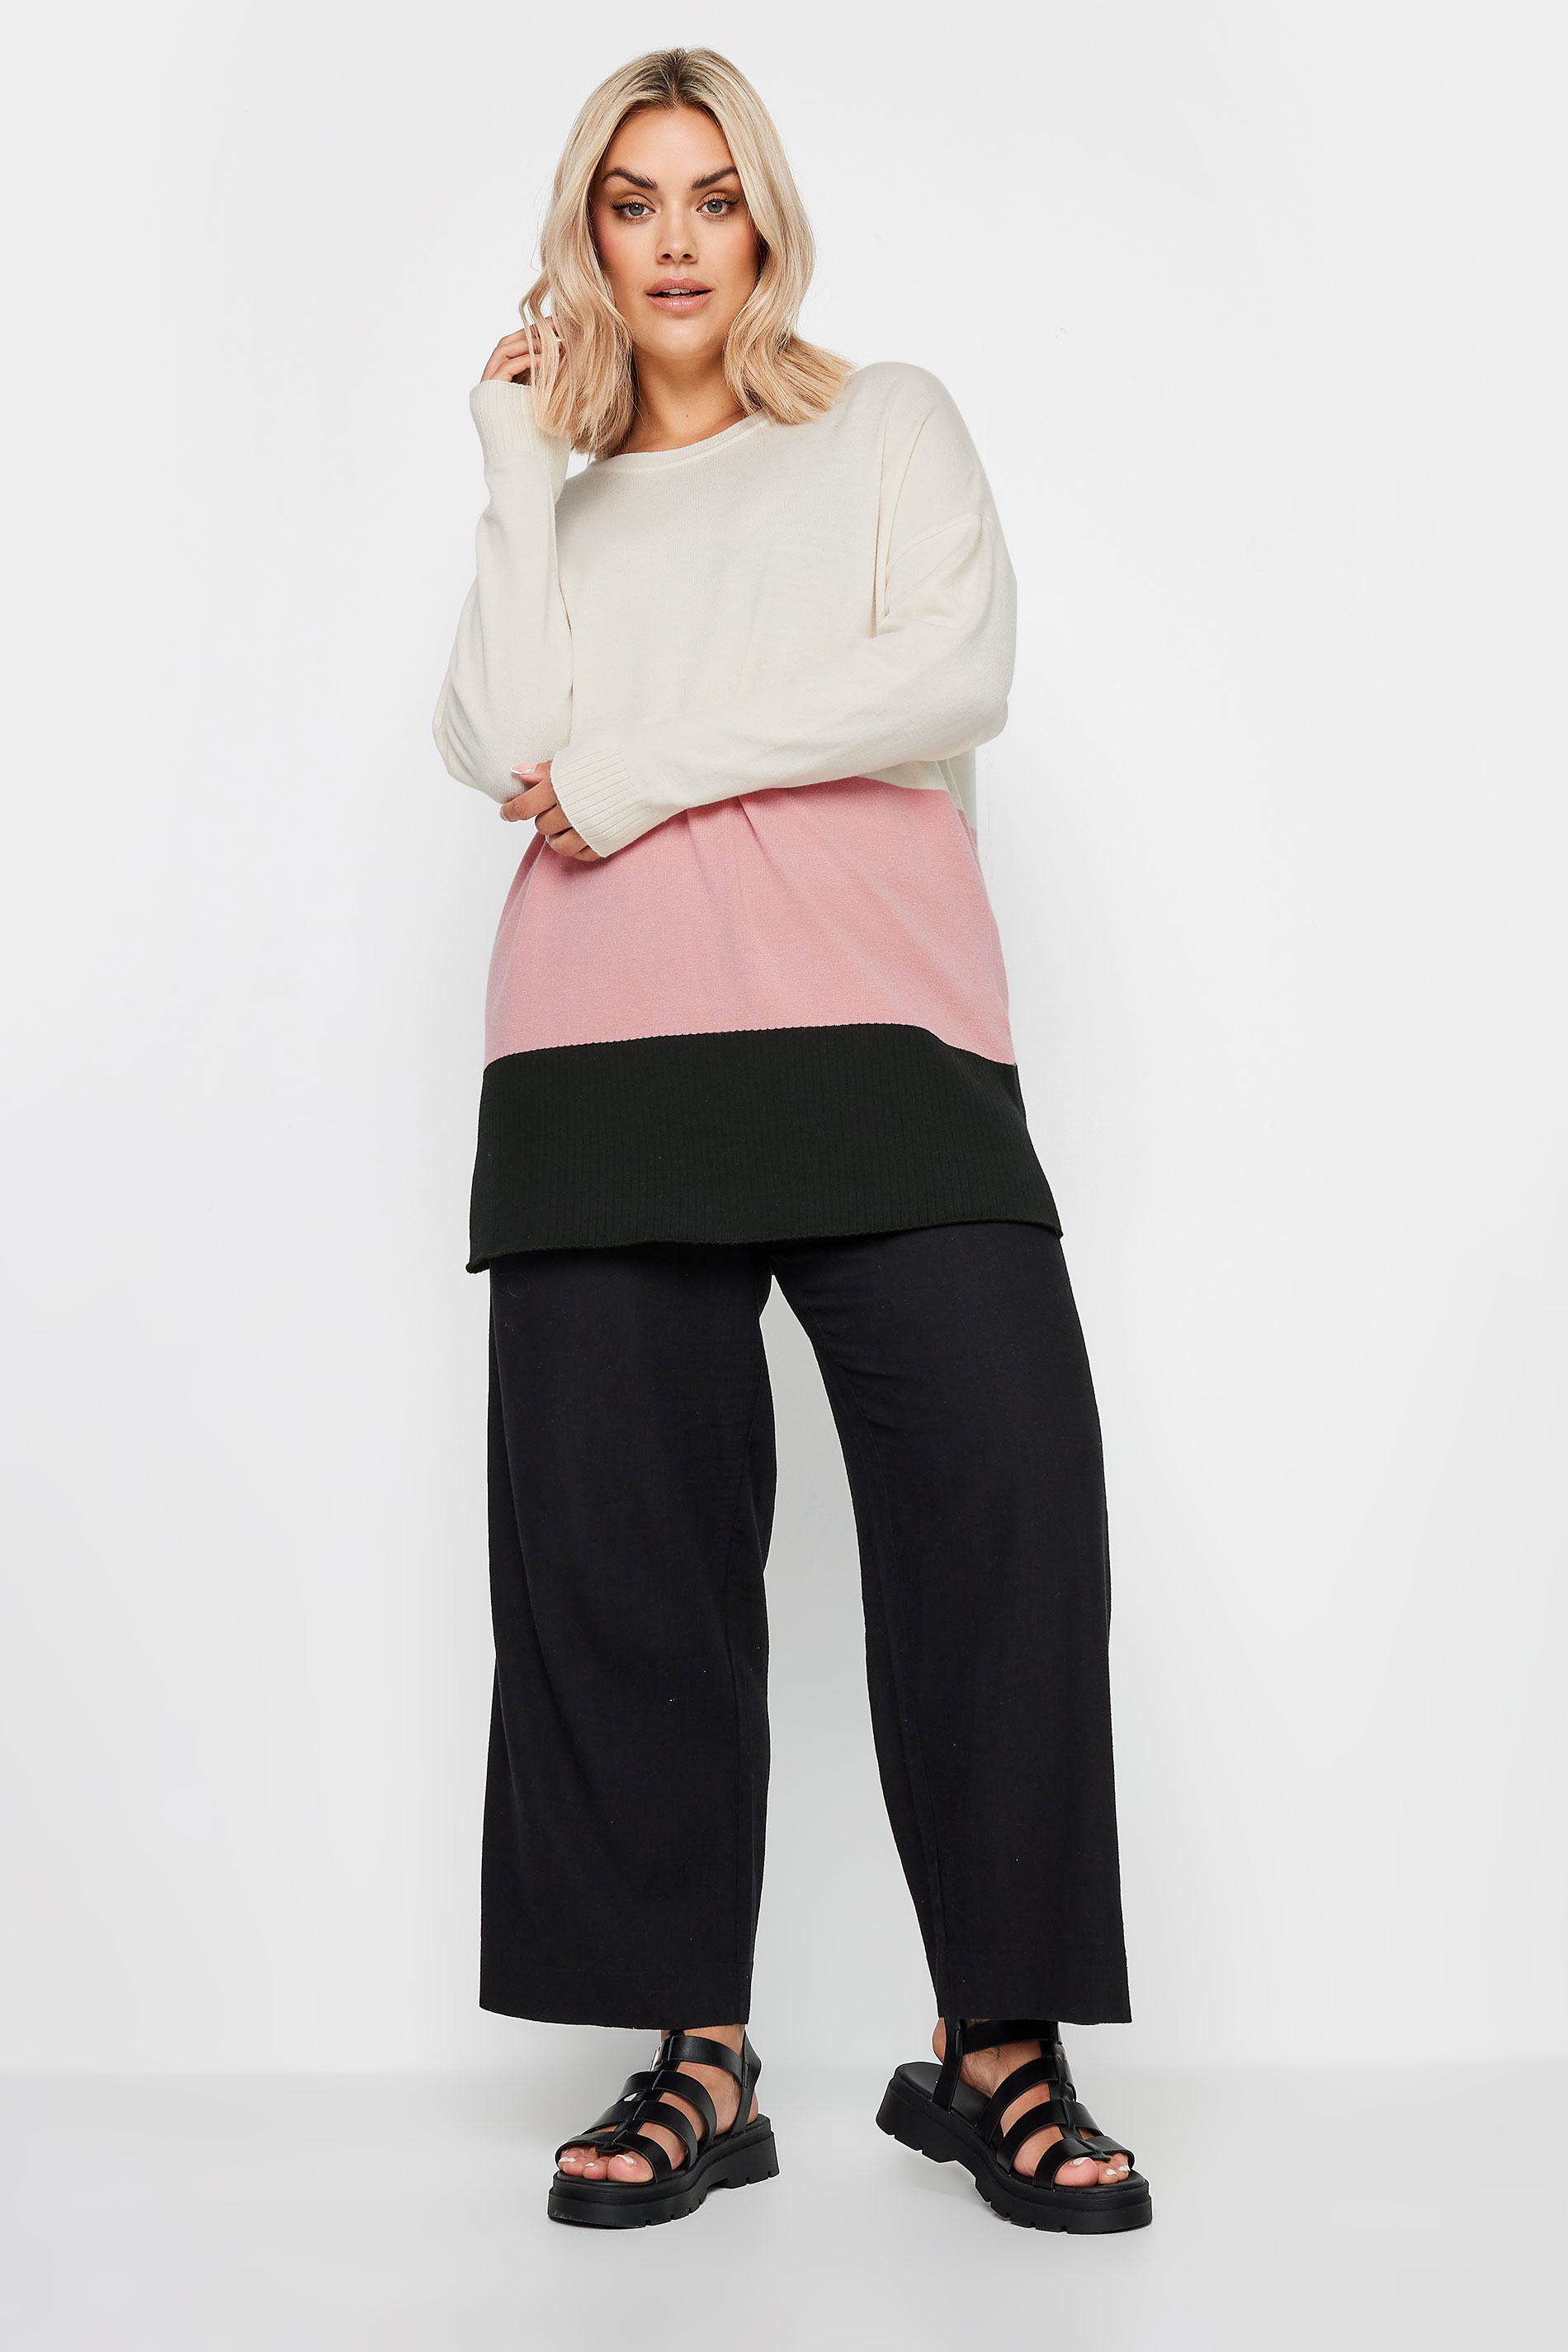 YOURS Plus Size White & Pink Colourblock Jumper | Yours Clothing 2